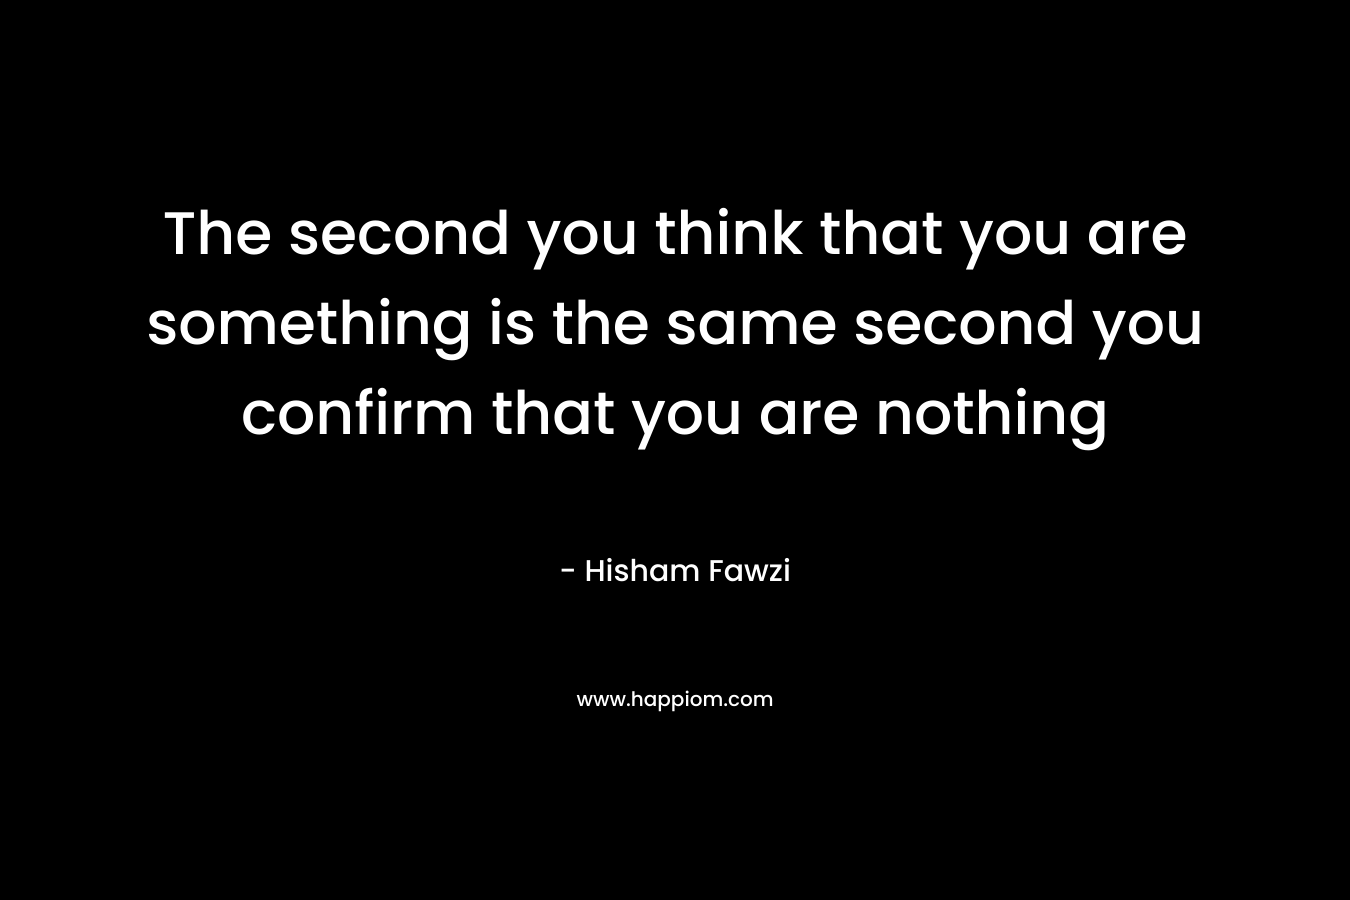 The second you think that you are something is the same second you confirm that you are nothing – Hisham Fawzi